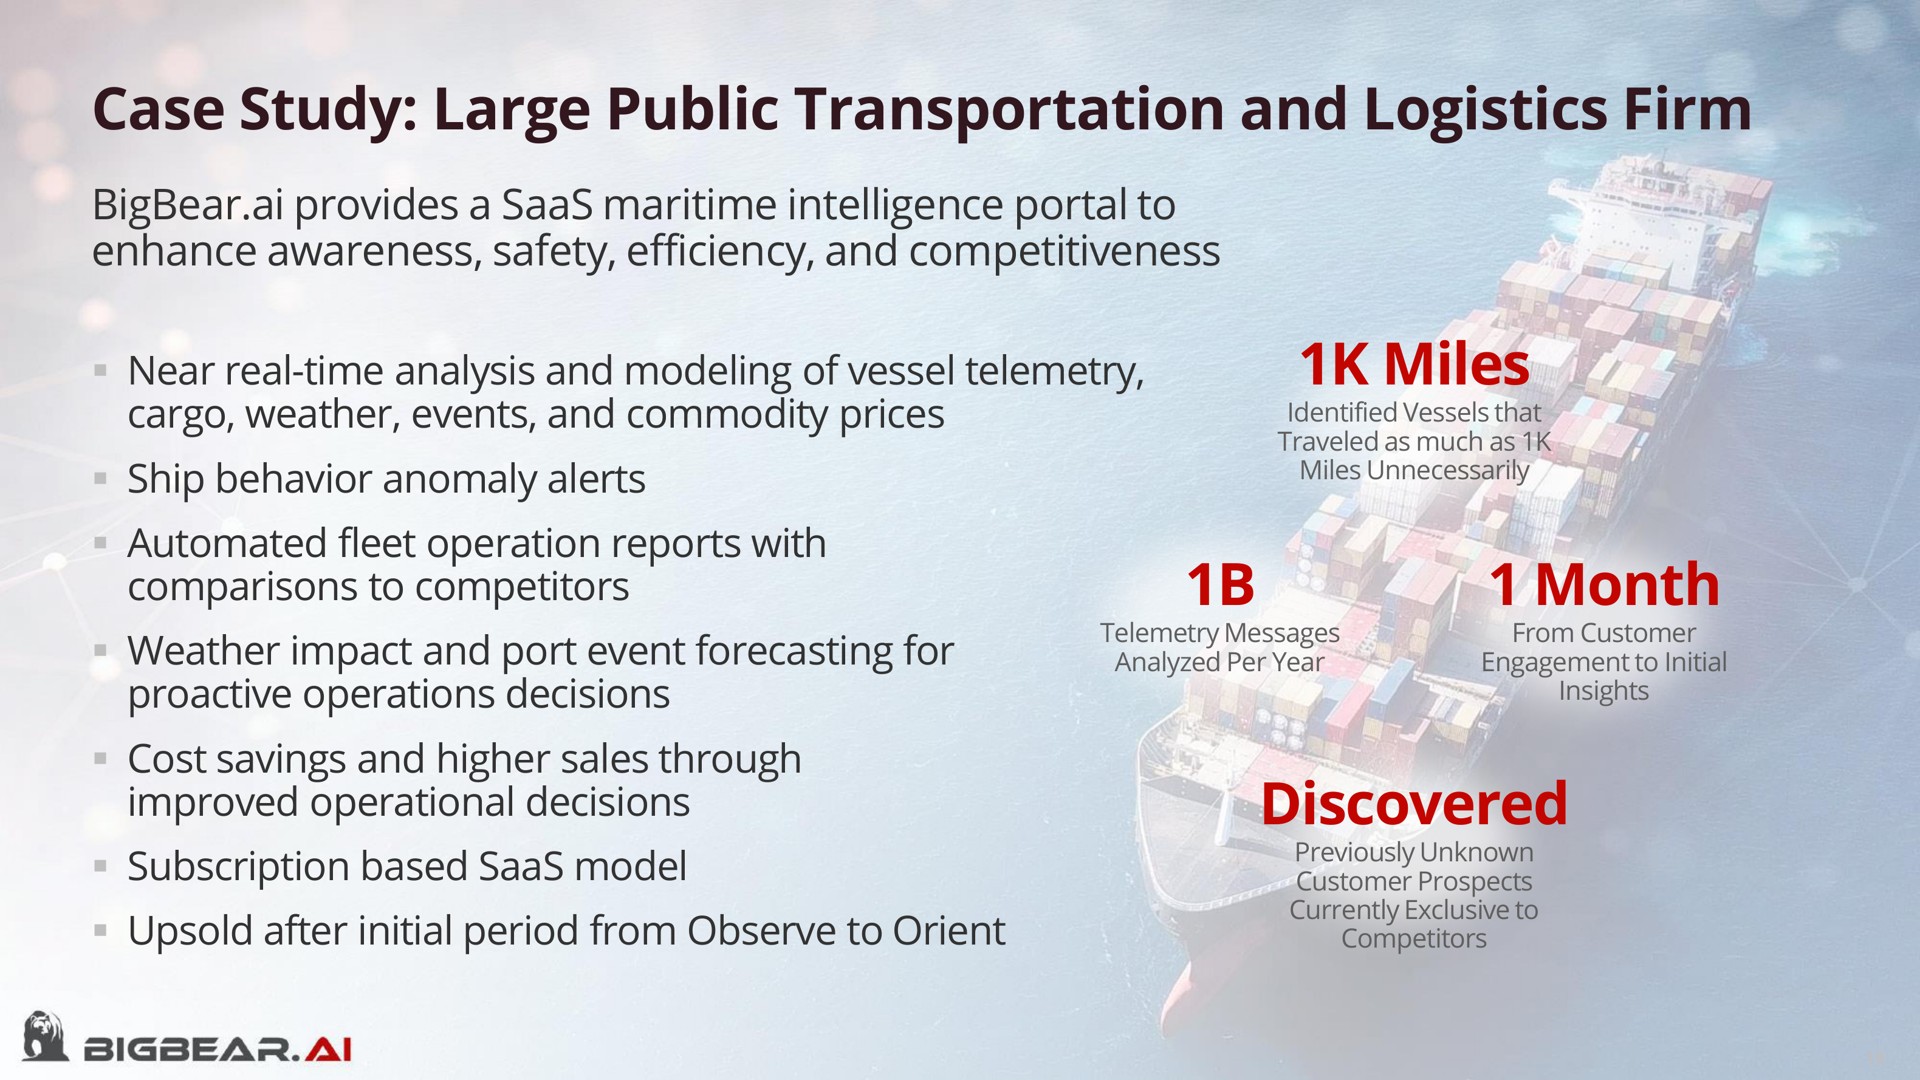 case study large public transportation and logistics firm miles month discovered subscription based model | Bigbear AI